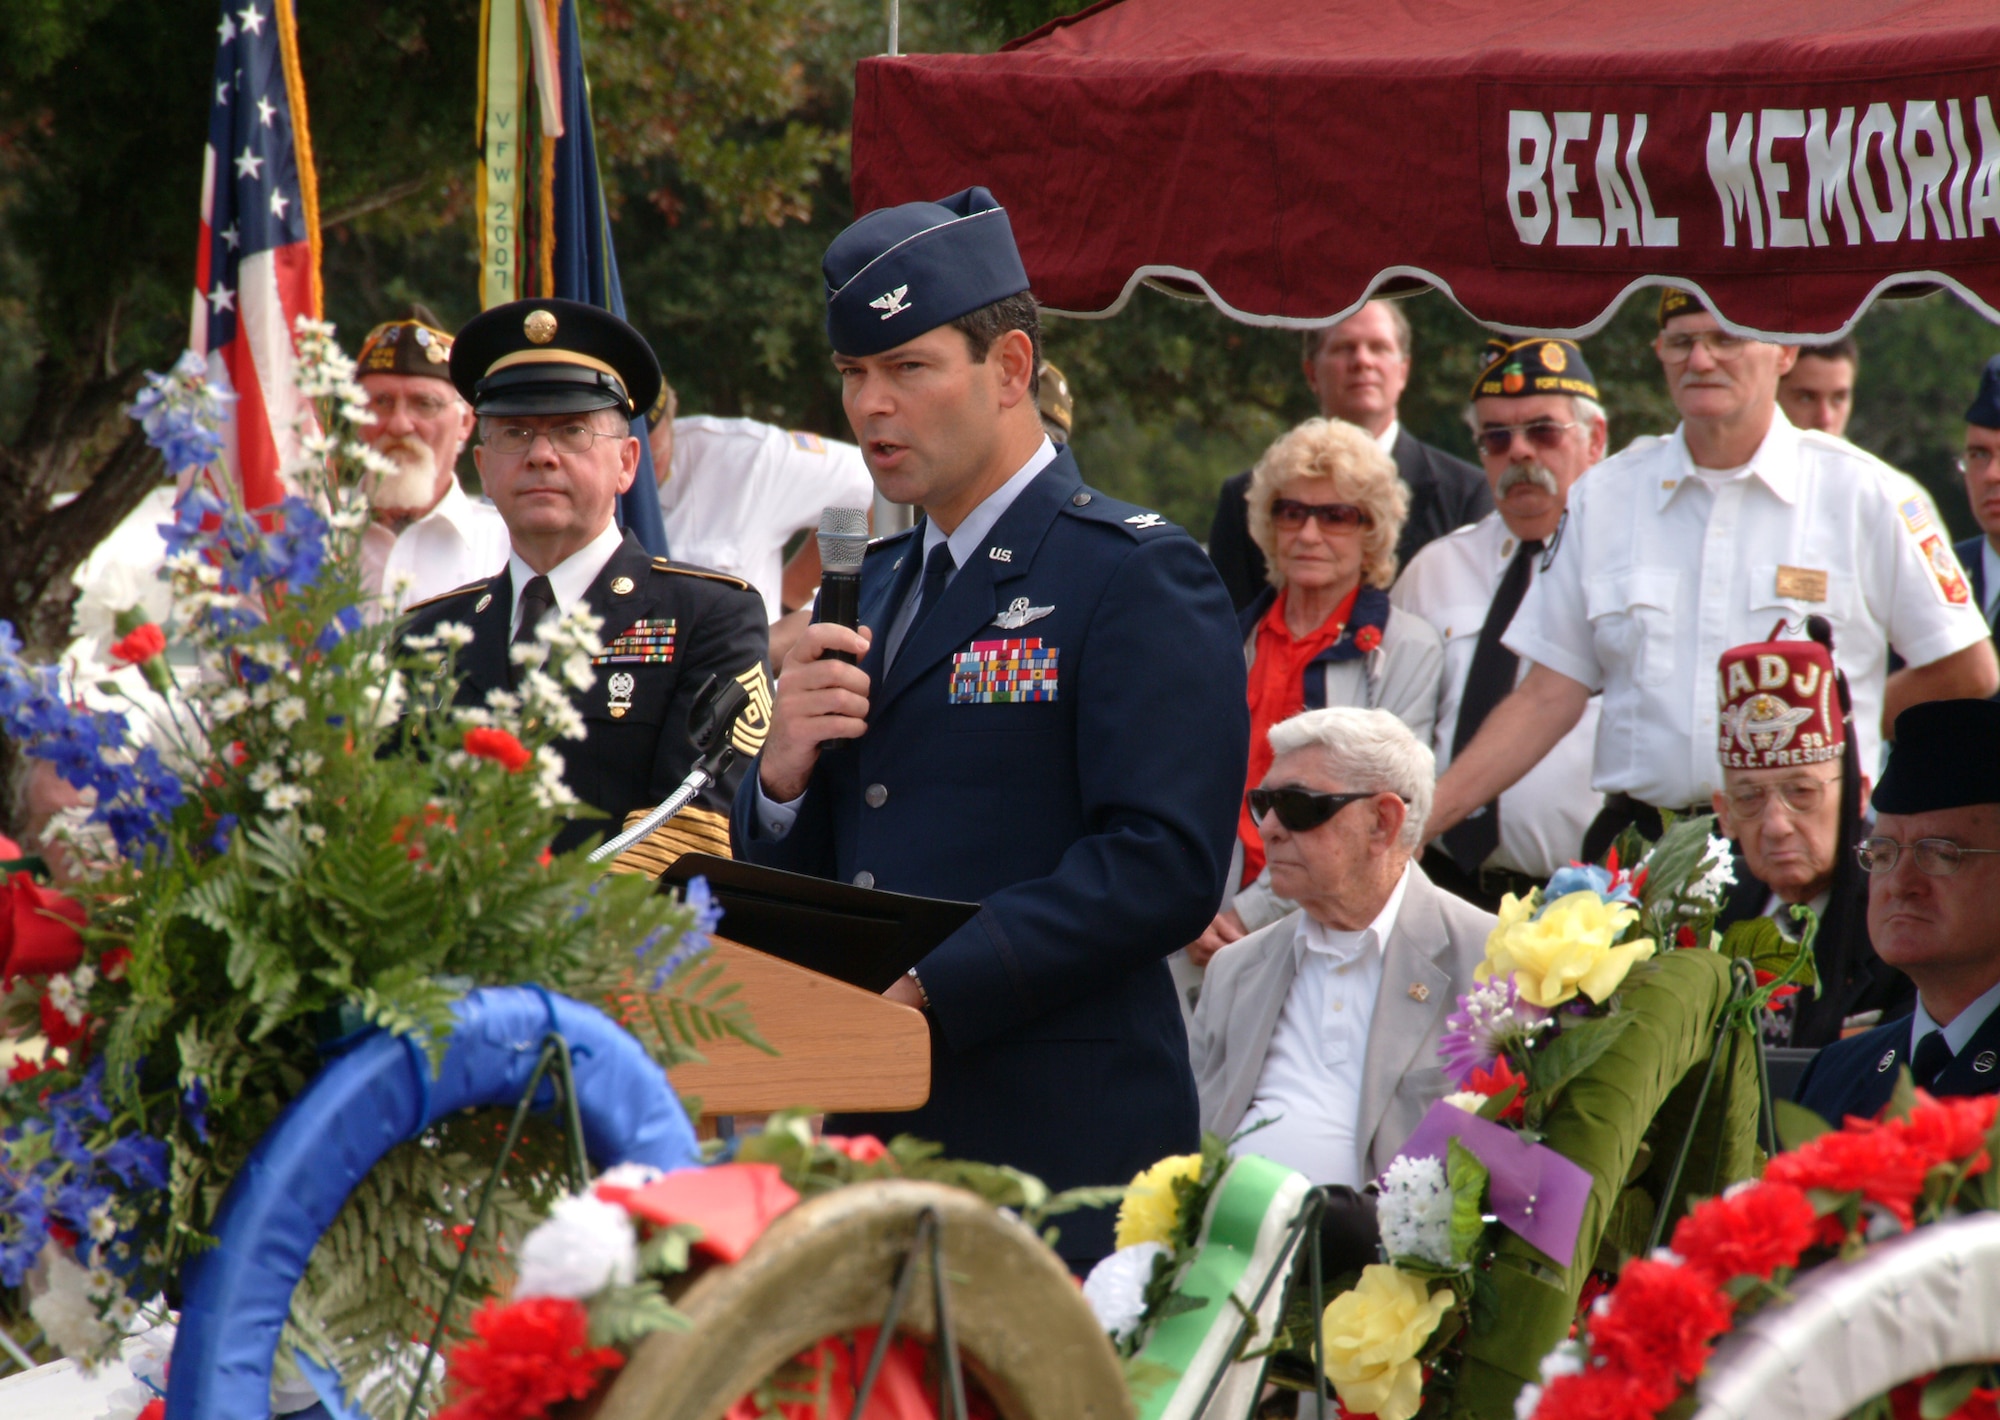 Col. Ken Wilsbach, 53d Wing commander, spoke to nearly 300 people at the Beal Memorial Cemetery Veterans Day ceremony in Fort Walton Beach, Fla. Nov. 12.  The colonel spoke about reflecting on the foresight, courage and sacrifices of past leaders and heroes and to remember the courage and sacrifices of today’s men and women in the military. The ceremony was concluded with a 21-gun salute and playing of taps by the Eglin Honor Guard and an F-16 missing man formation fly-over of the 85th Test and Evaluation Squadron. (U.S. Air Force photo/ Tech. Sgt. Andrew Leonhard)